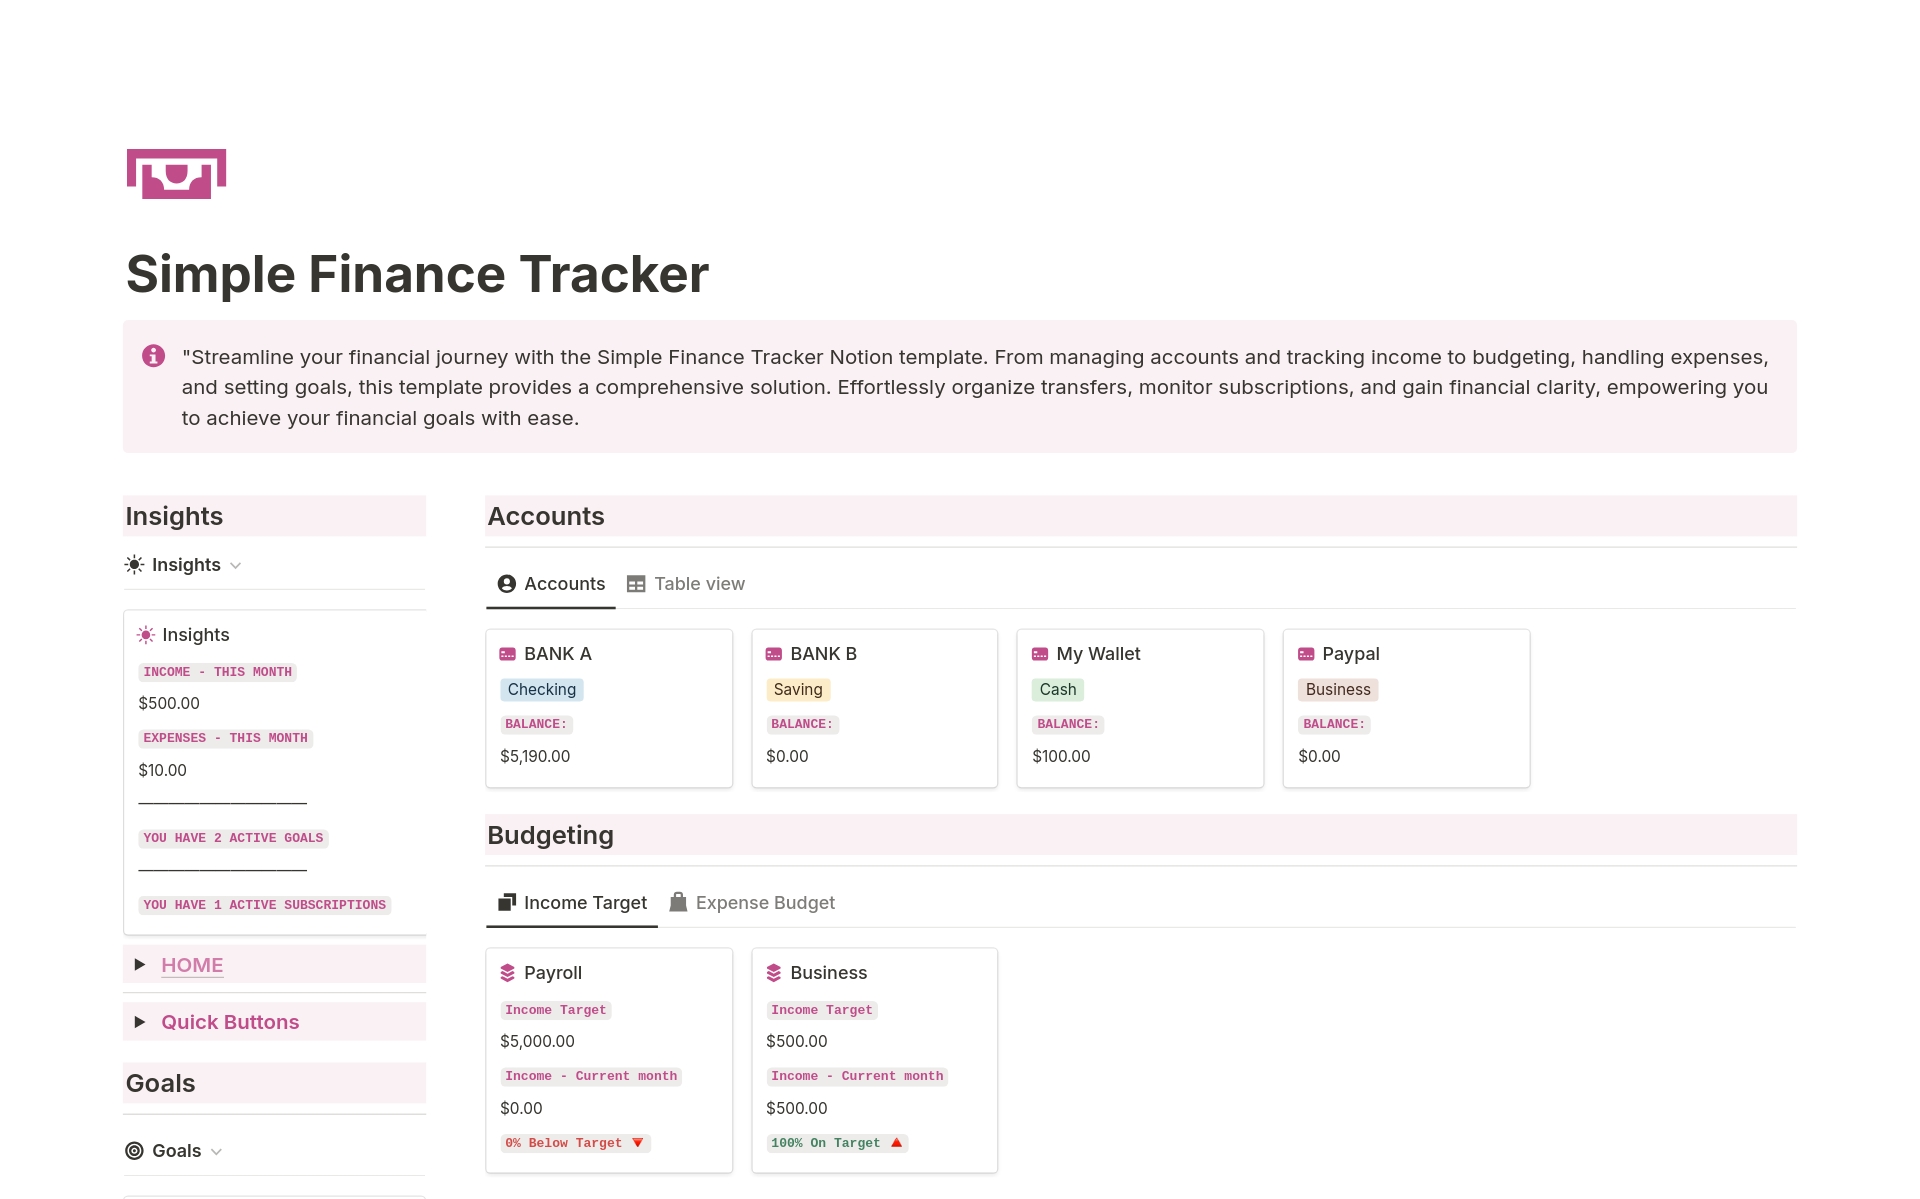 Streamline your financial journey with the Simple Finance Tracker Notion template. From managing accounts and tracking income to budgeting, handling expenses, and setting goals, this template provides a comprehensive solution. 